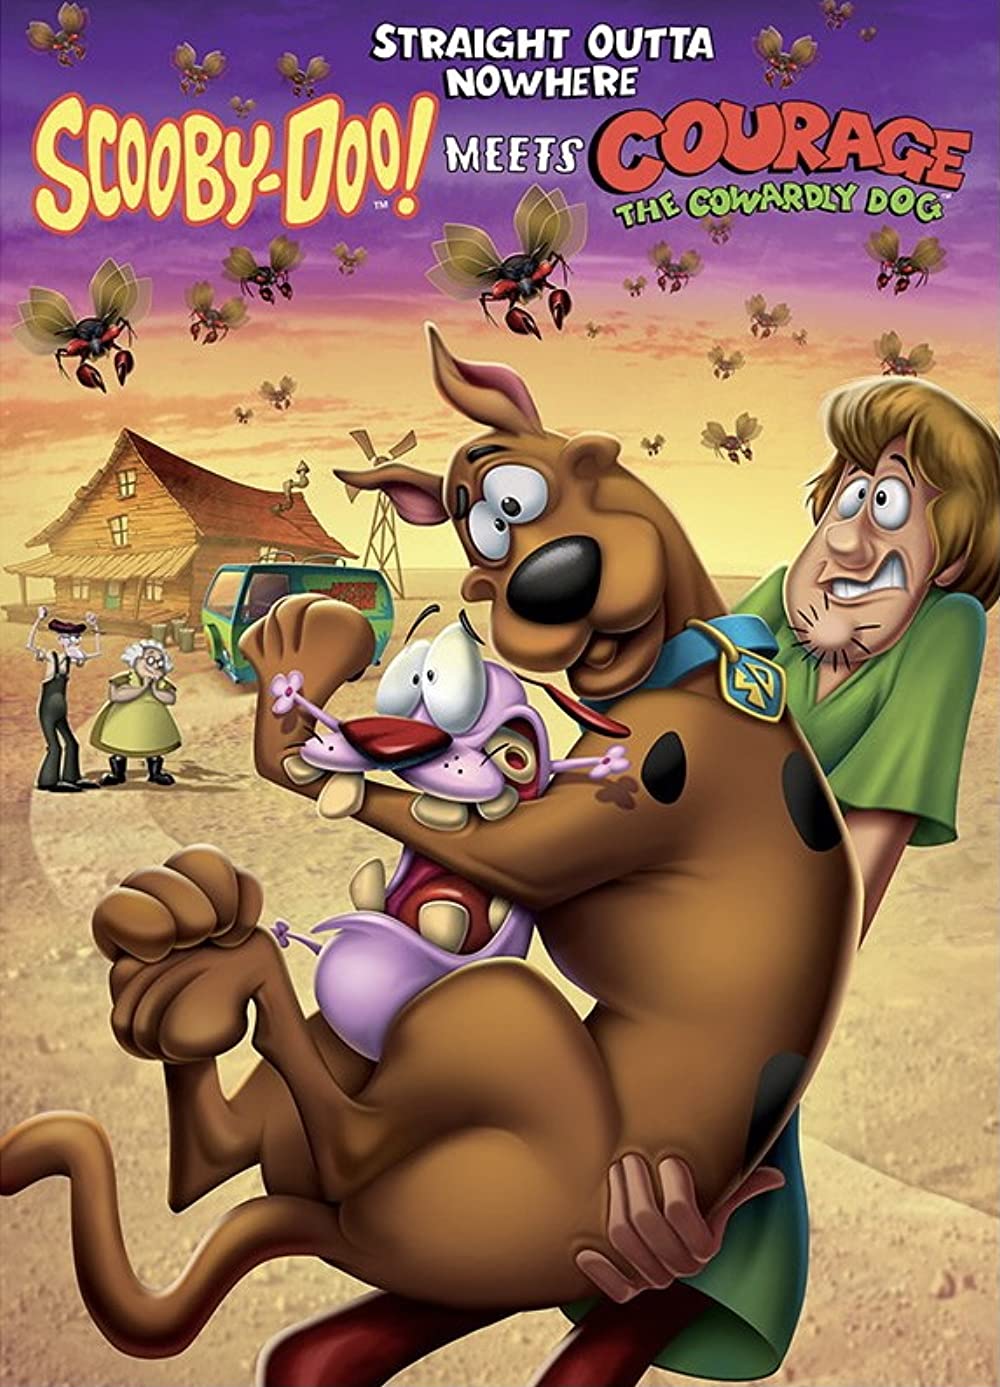 Straight Outta Nowhere  Scooby-Doo! Meets Courage the Cowardly Dog (2021)